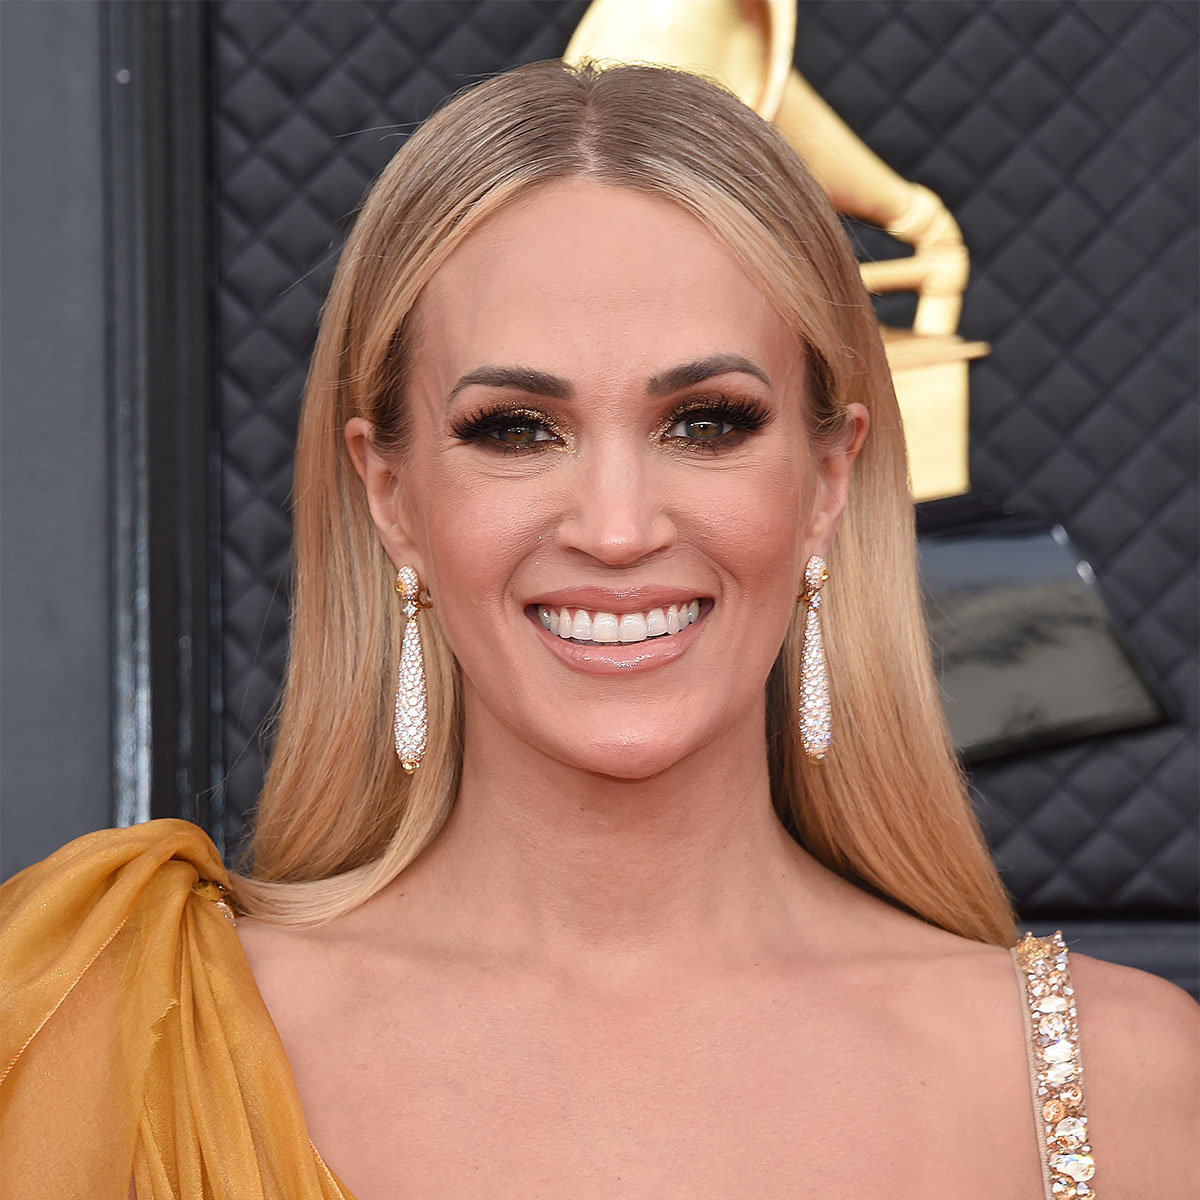 Carrie Underwood Serves Denim, Metallic, And Fringe Looks For Her Las Vegas  Residency Amid Marriage Troubles - SHEfinds